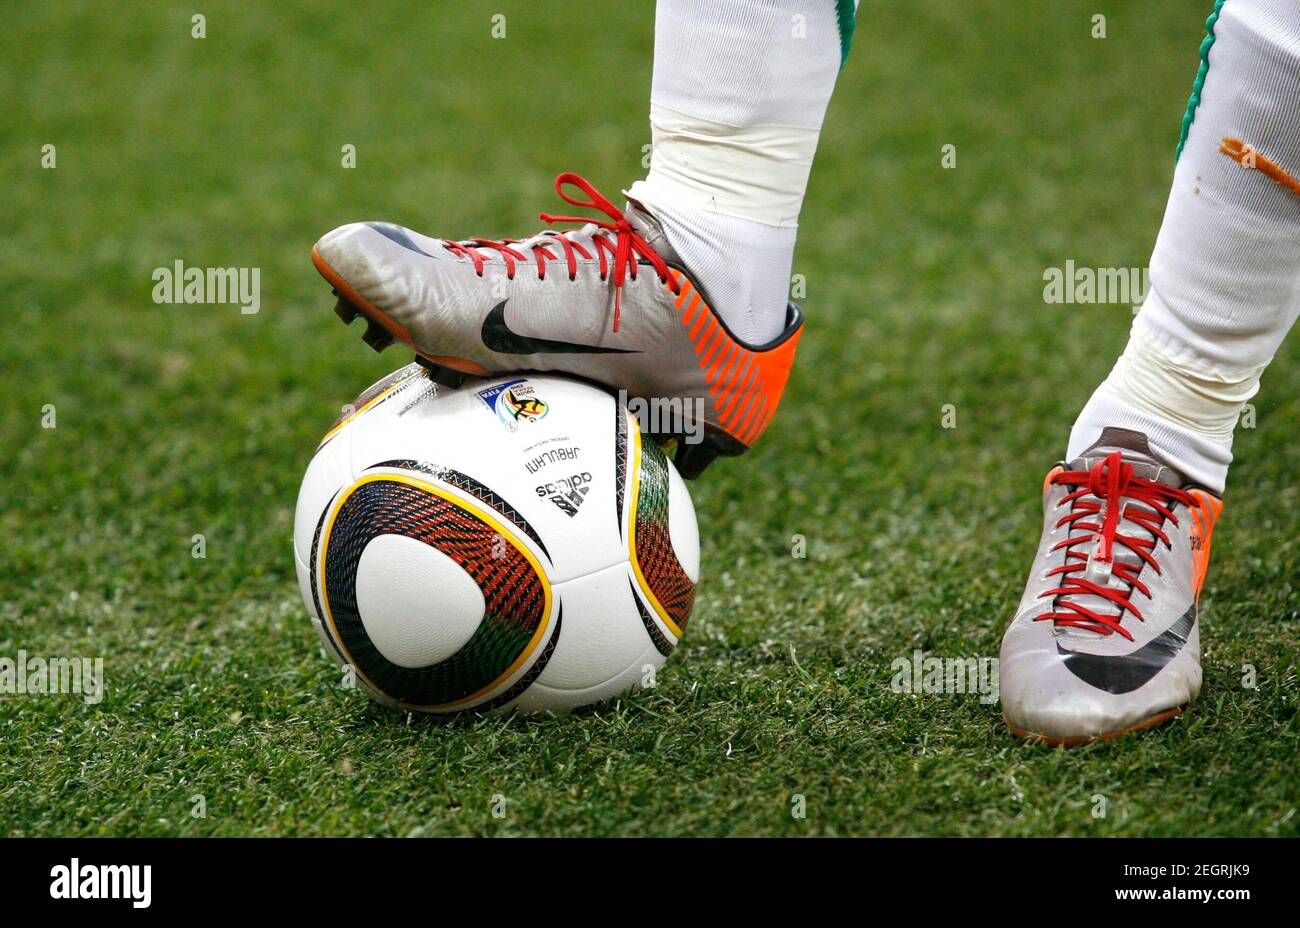 Football - North Korea v Ivory Coast FIFA World Cup South Africa 2010 -  Group G - Mbombela Stadium, Nelspruit, South Africa - 25/6/10 Close up of  players foot on the adidas